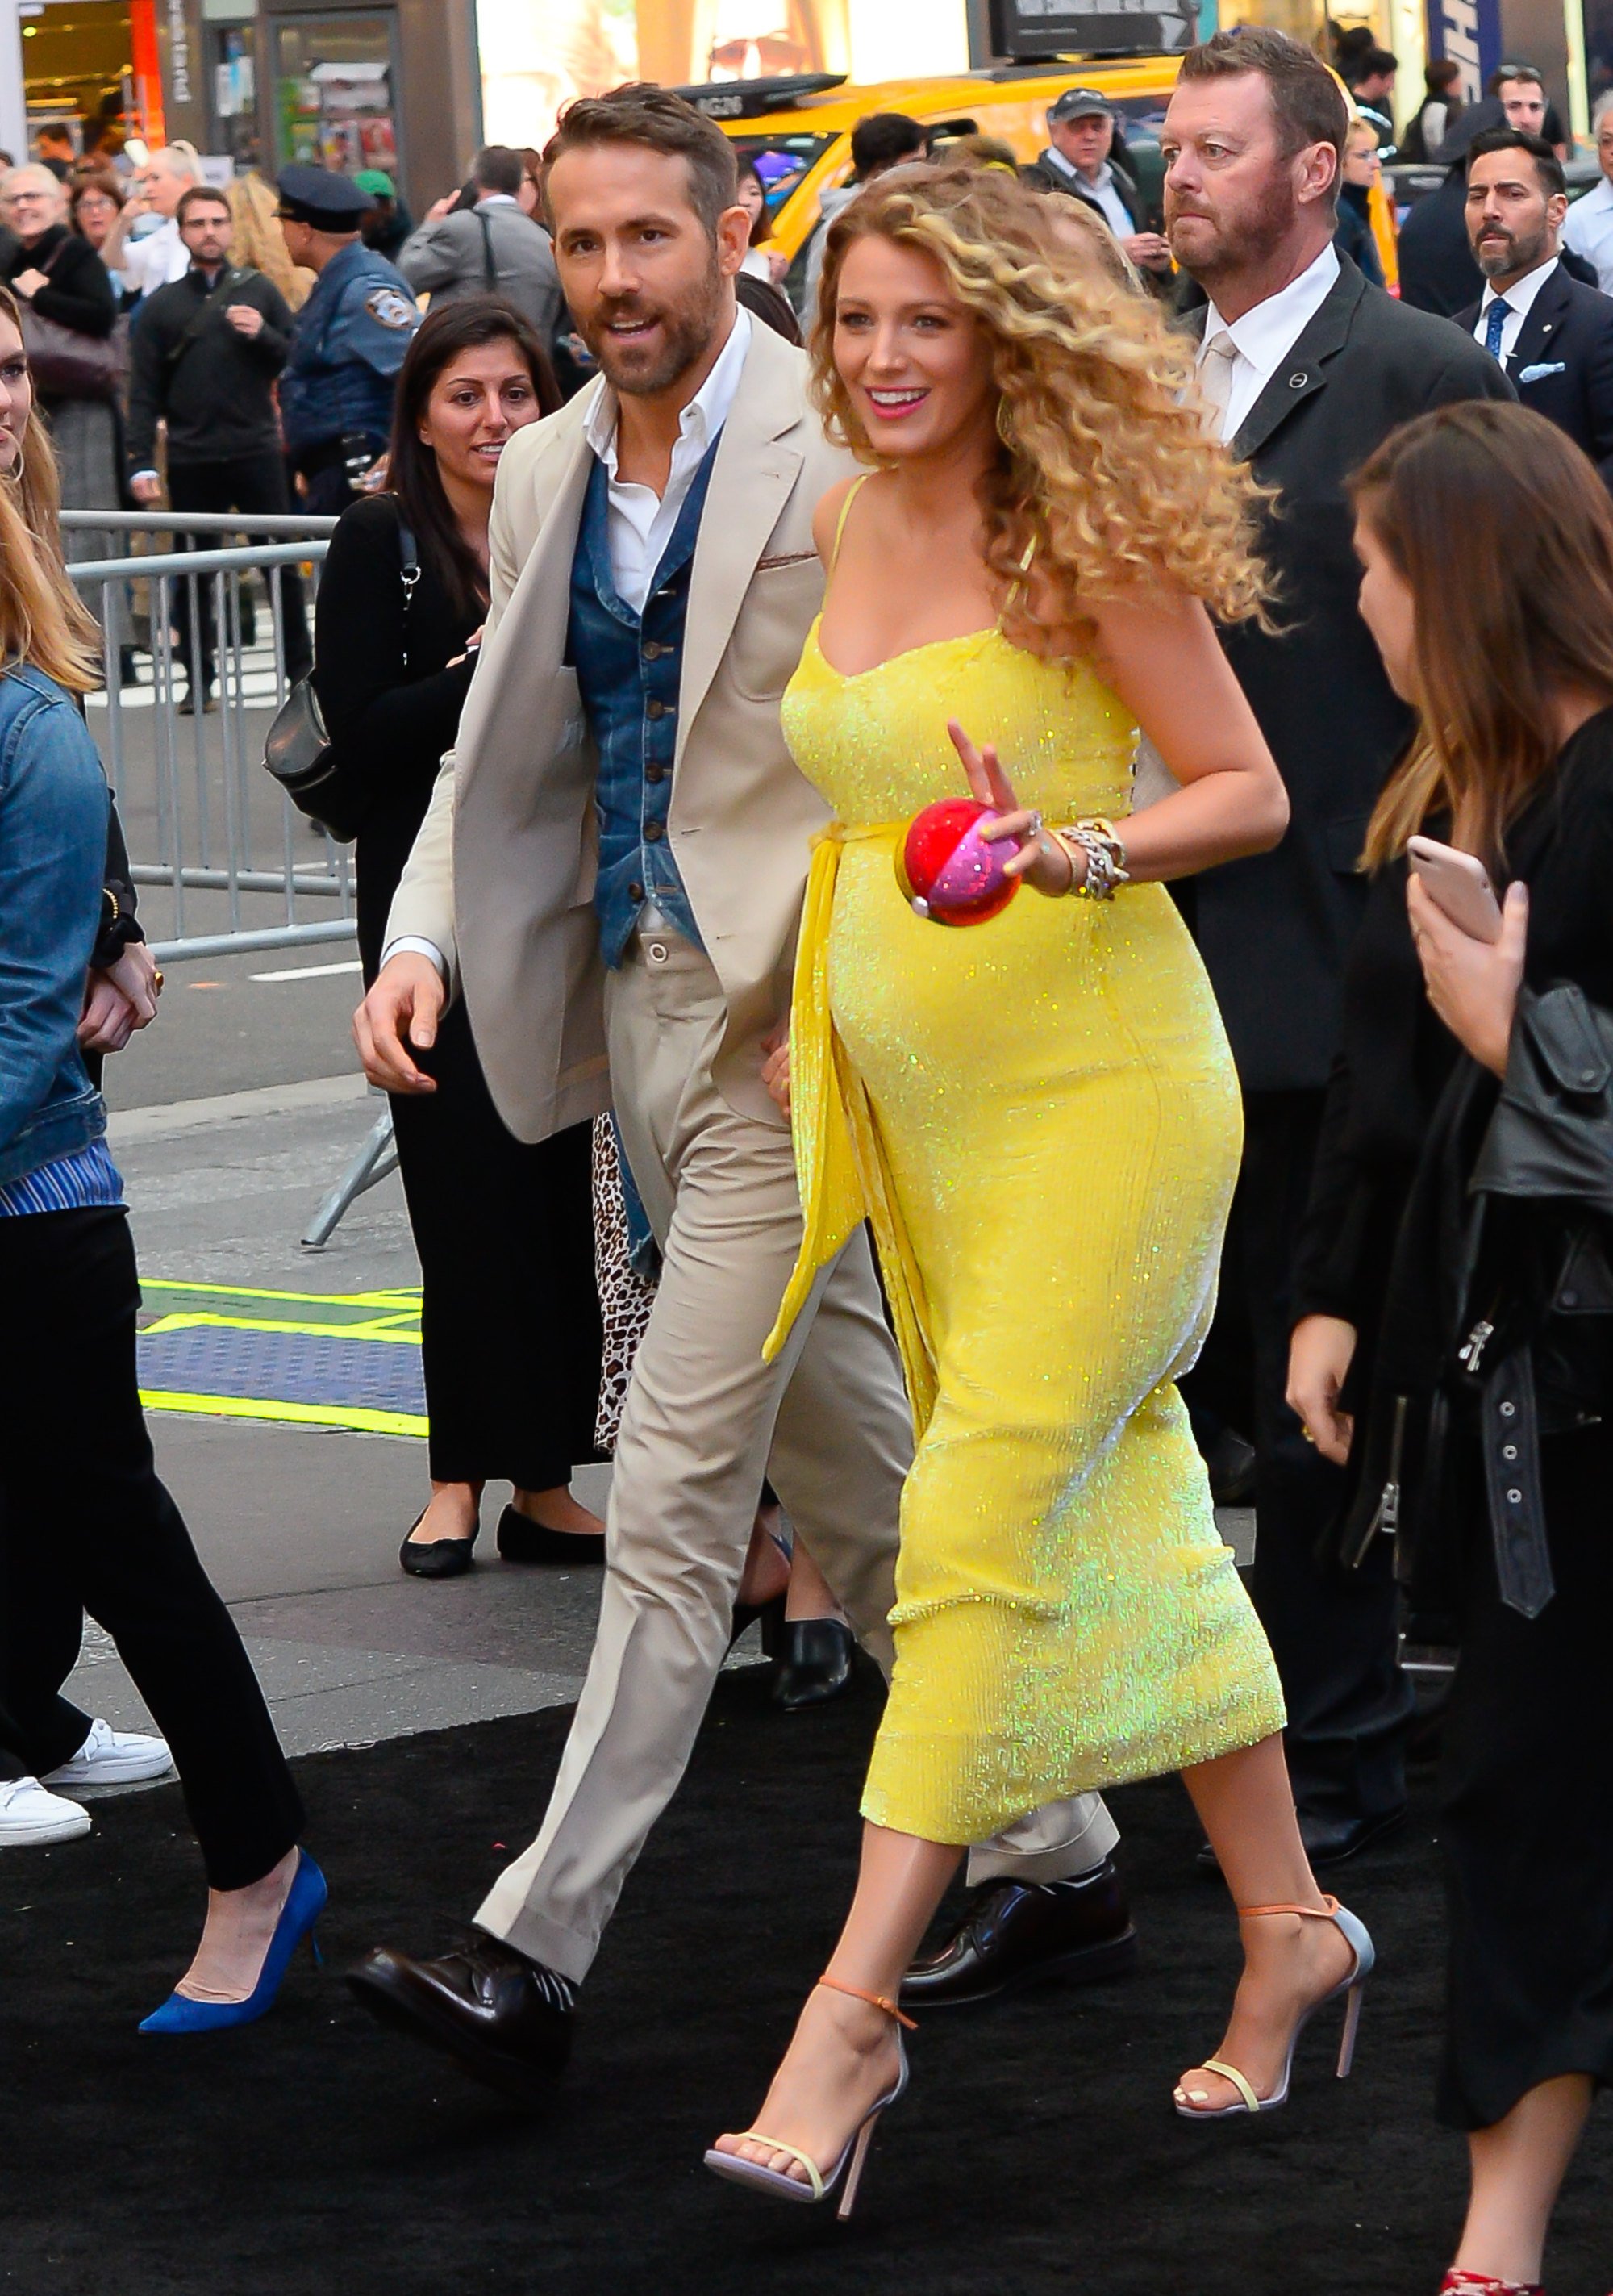 Husband and wife duo Ryan Reynolds and Blake Lively attend the premiere of Pokemon: Detective Pikachu at Military Island in May 2019, in New York City. Photo: Getty Images